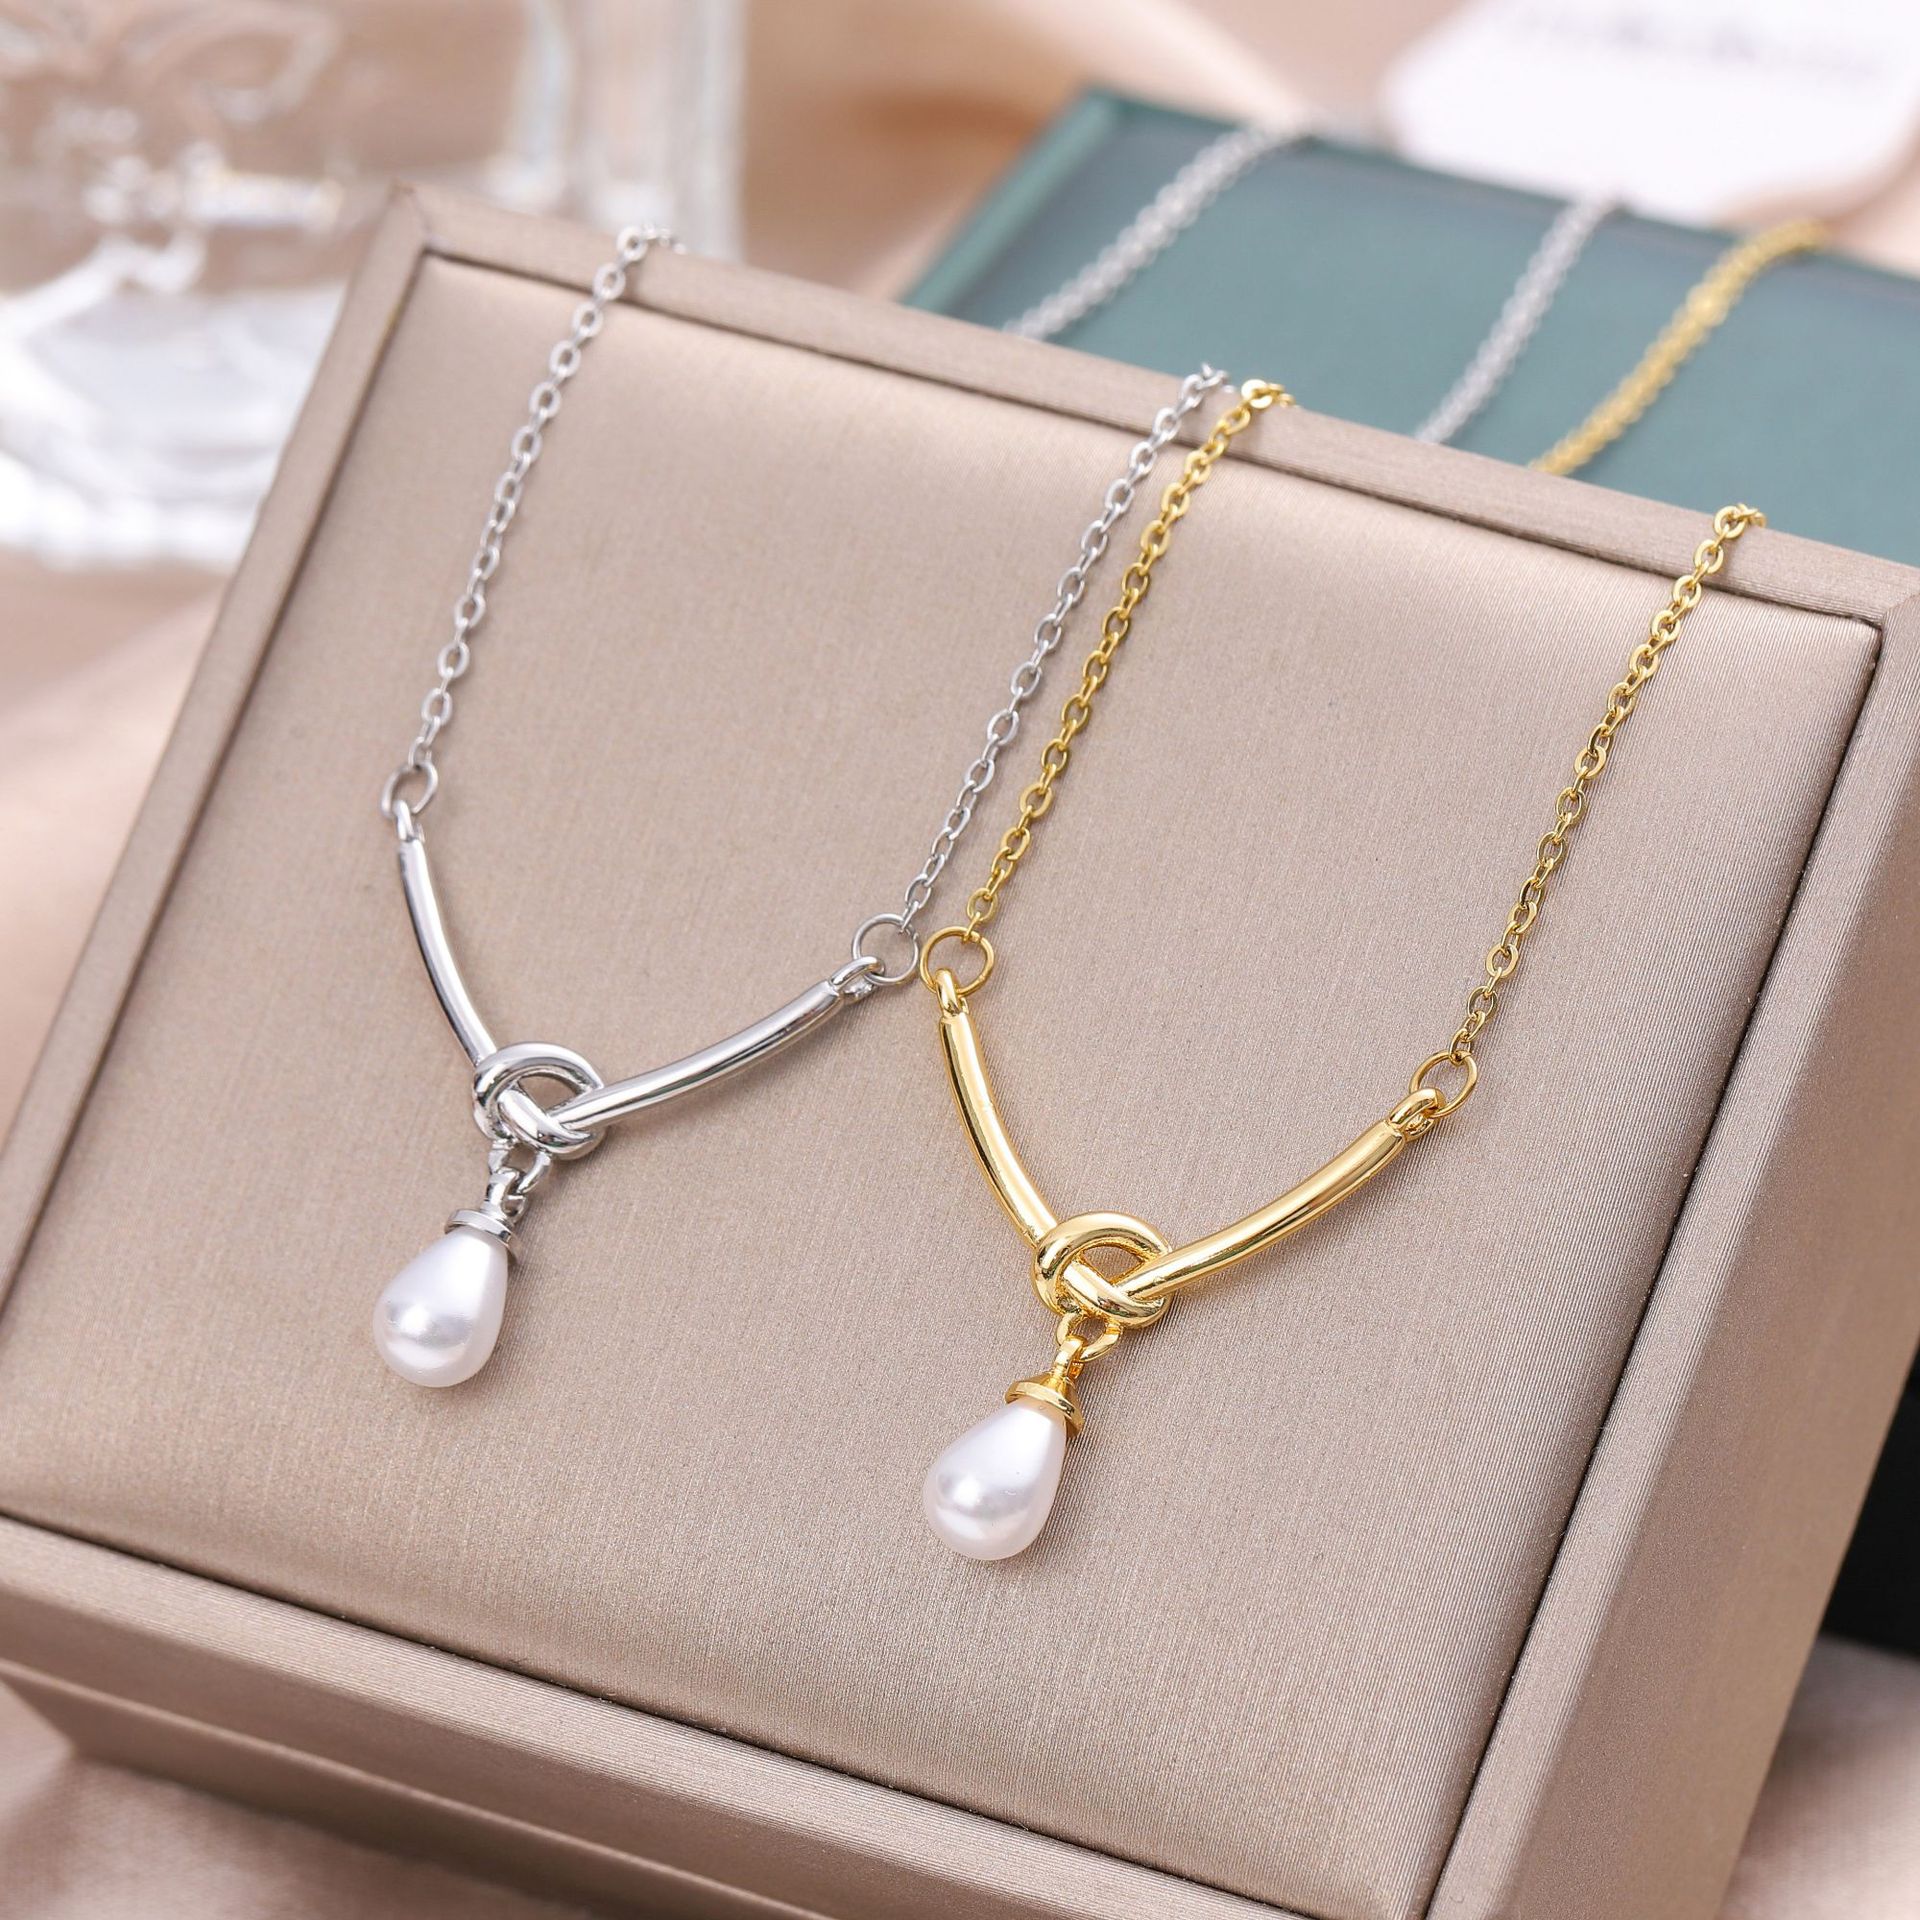 New String Pearl Item Titanium Steel Necklace Women's Special-Interest Design Simple and Light Luxury Clavicle Chain All-Match High-End Neck Accessories